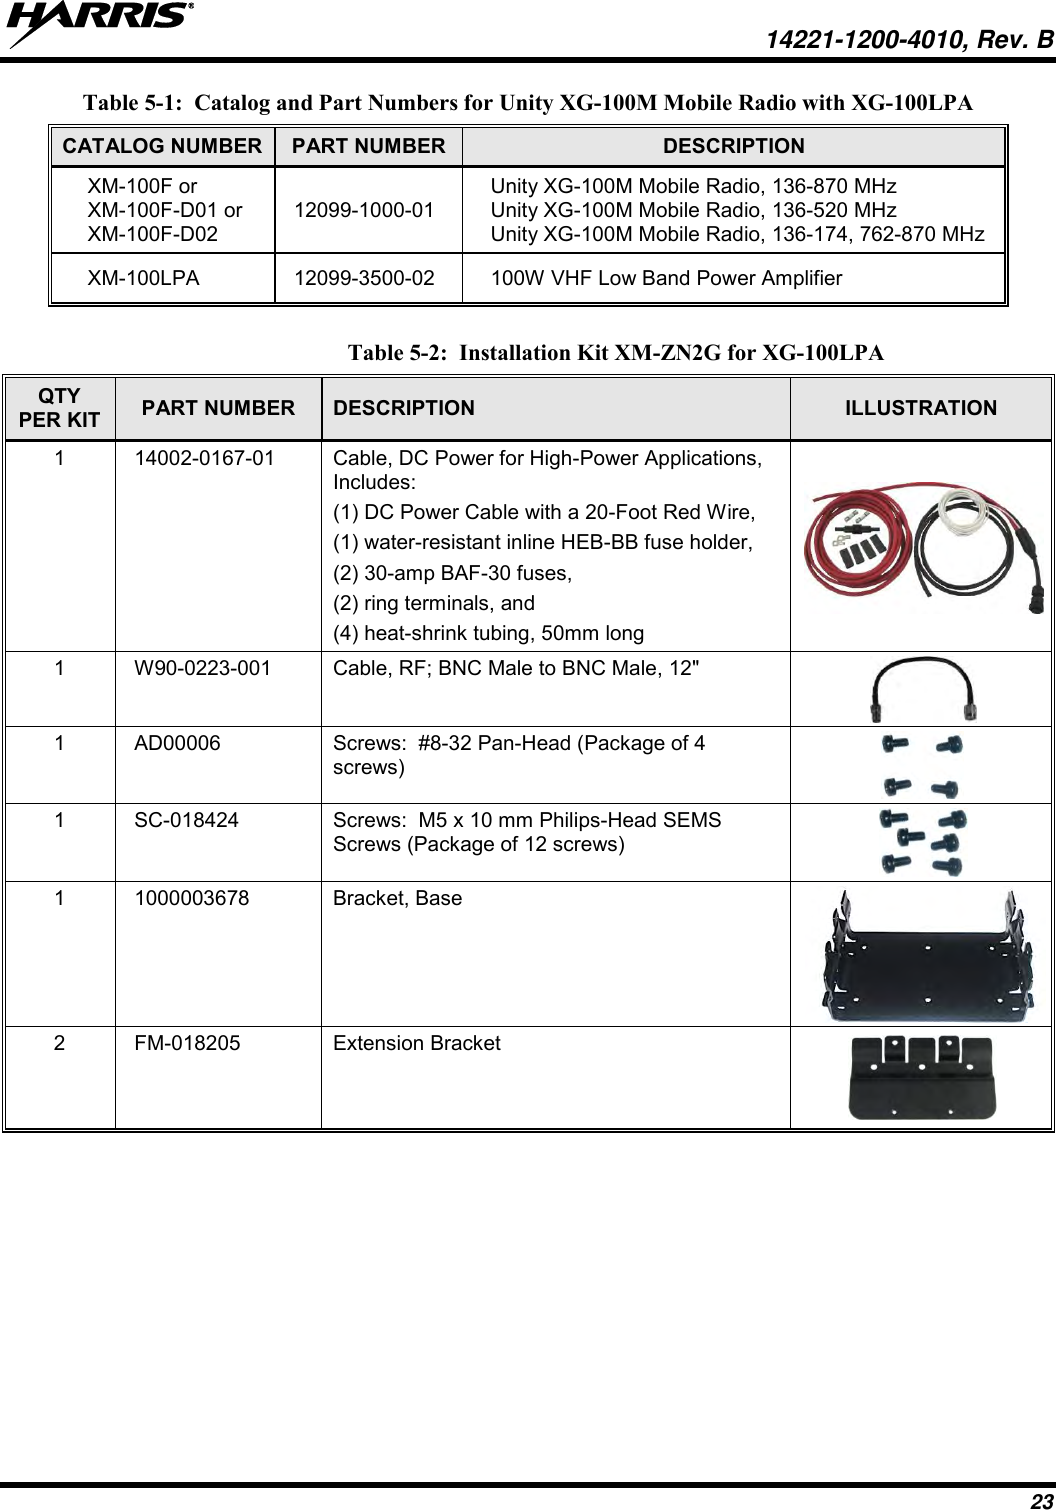   14221-1200-4010, Rev. B 23 Table 5-1:  Catalog and Part Numbers for Unity XG-100M Mobile Radio with XG-100LPA   CATALOG NUMBER PART NUMBER DESCRIPTION XM-100F or XM-100F-D01 or XM-100F-D02  12099-1000-01 Unity XG-100M Mobile Radio, 136-870 MHz Unity XG-100M Mobile Radio, 136-520 MHz Unity XG-100M Mobile Radio, 136-174, 762-870 MHz XM-100LPA 12099-3500-02 100W VHF Low Band Power Amplifier   Table 5-2:  Installation Kit XM-ZN2G for XG-100LPA QTY PER KIT PART NUMBER DESCRIPTION ILLUSTRATION 1 14002-0167-01 Cable, DC Power for High-Power Applications, Includes:  (1) DC Power Cable with a 20-Foot Red Wire,  (1) water-resistant inline HEB-BB fuse holder, (2) 30-amp BAF-30 fuses,  (2) ring terminals, and  (4) heat-shrink tubing, 50mm long  1 W90-0223-001 Cable, RF; BNC Male to BNC Male, 12&quot;  1 AD00006 Screws:  #8-32 Pan-Head (Package of 4 screws)  1 SC-018424 Screws:  M5 x 10 mm Philips-Head SEMS Screws (Package of 12 screws)  1 1000003678 Bracket, Base  2 FM-018205 Extension Bracket     